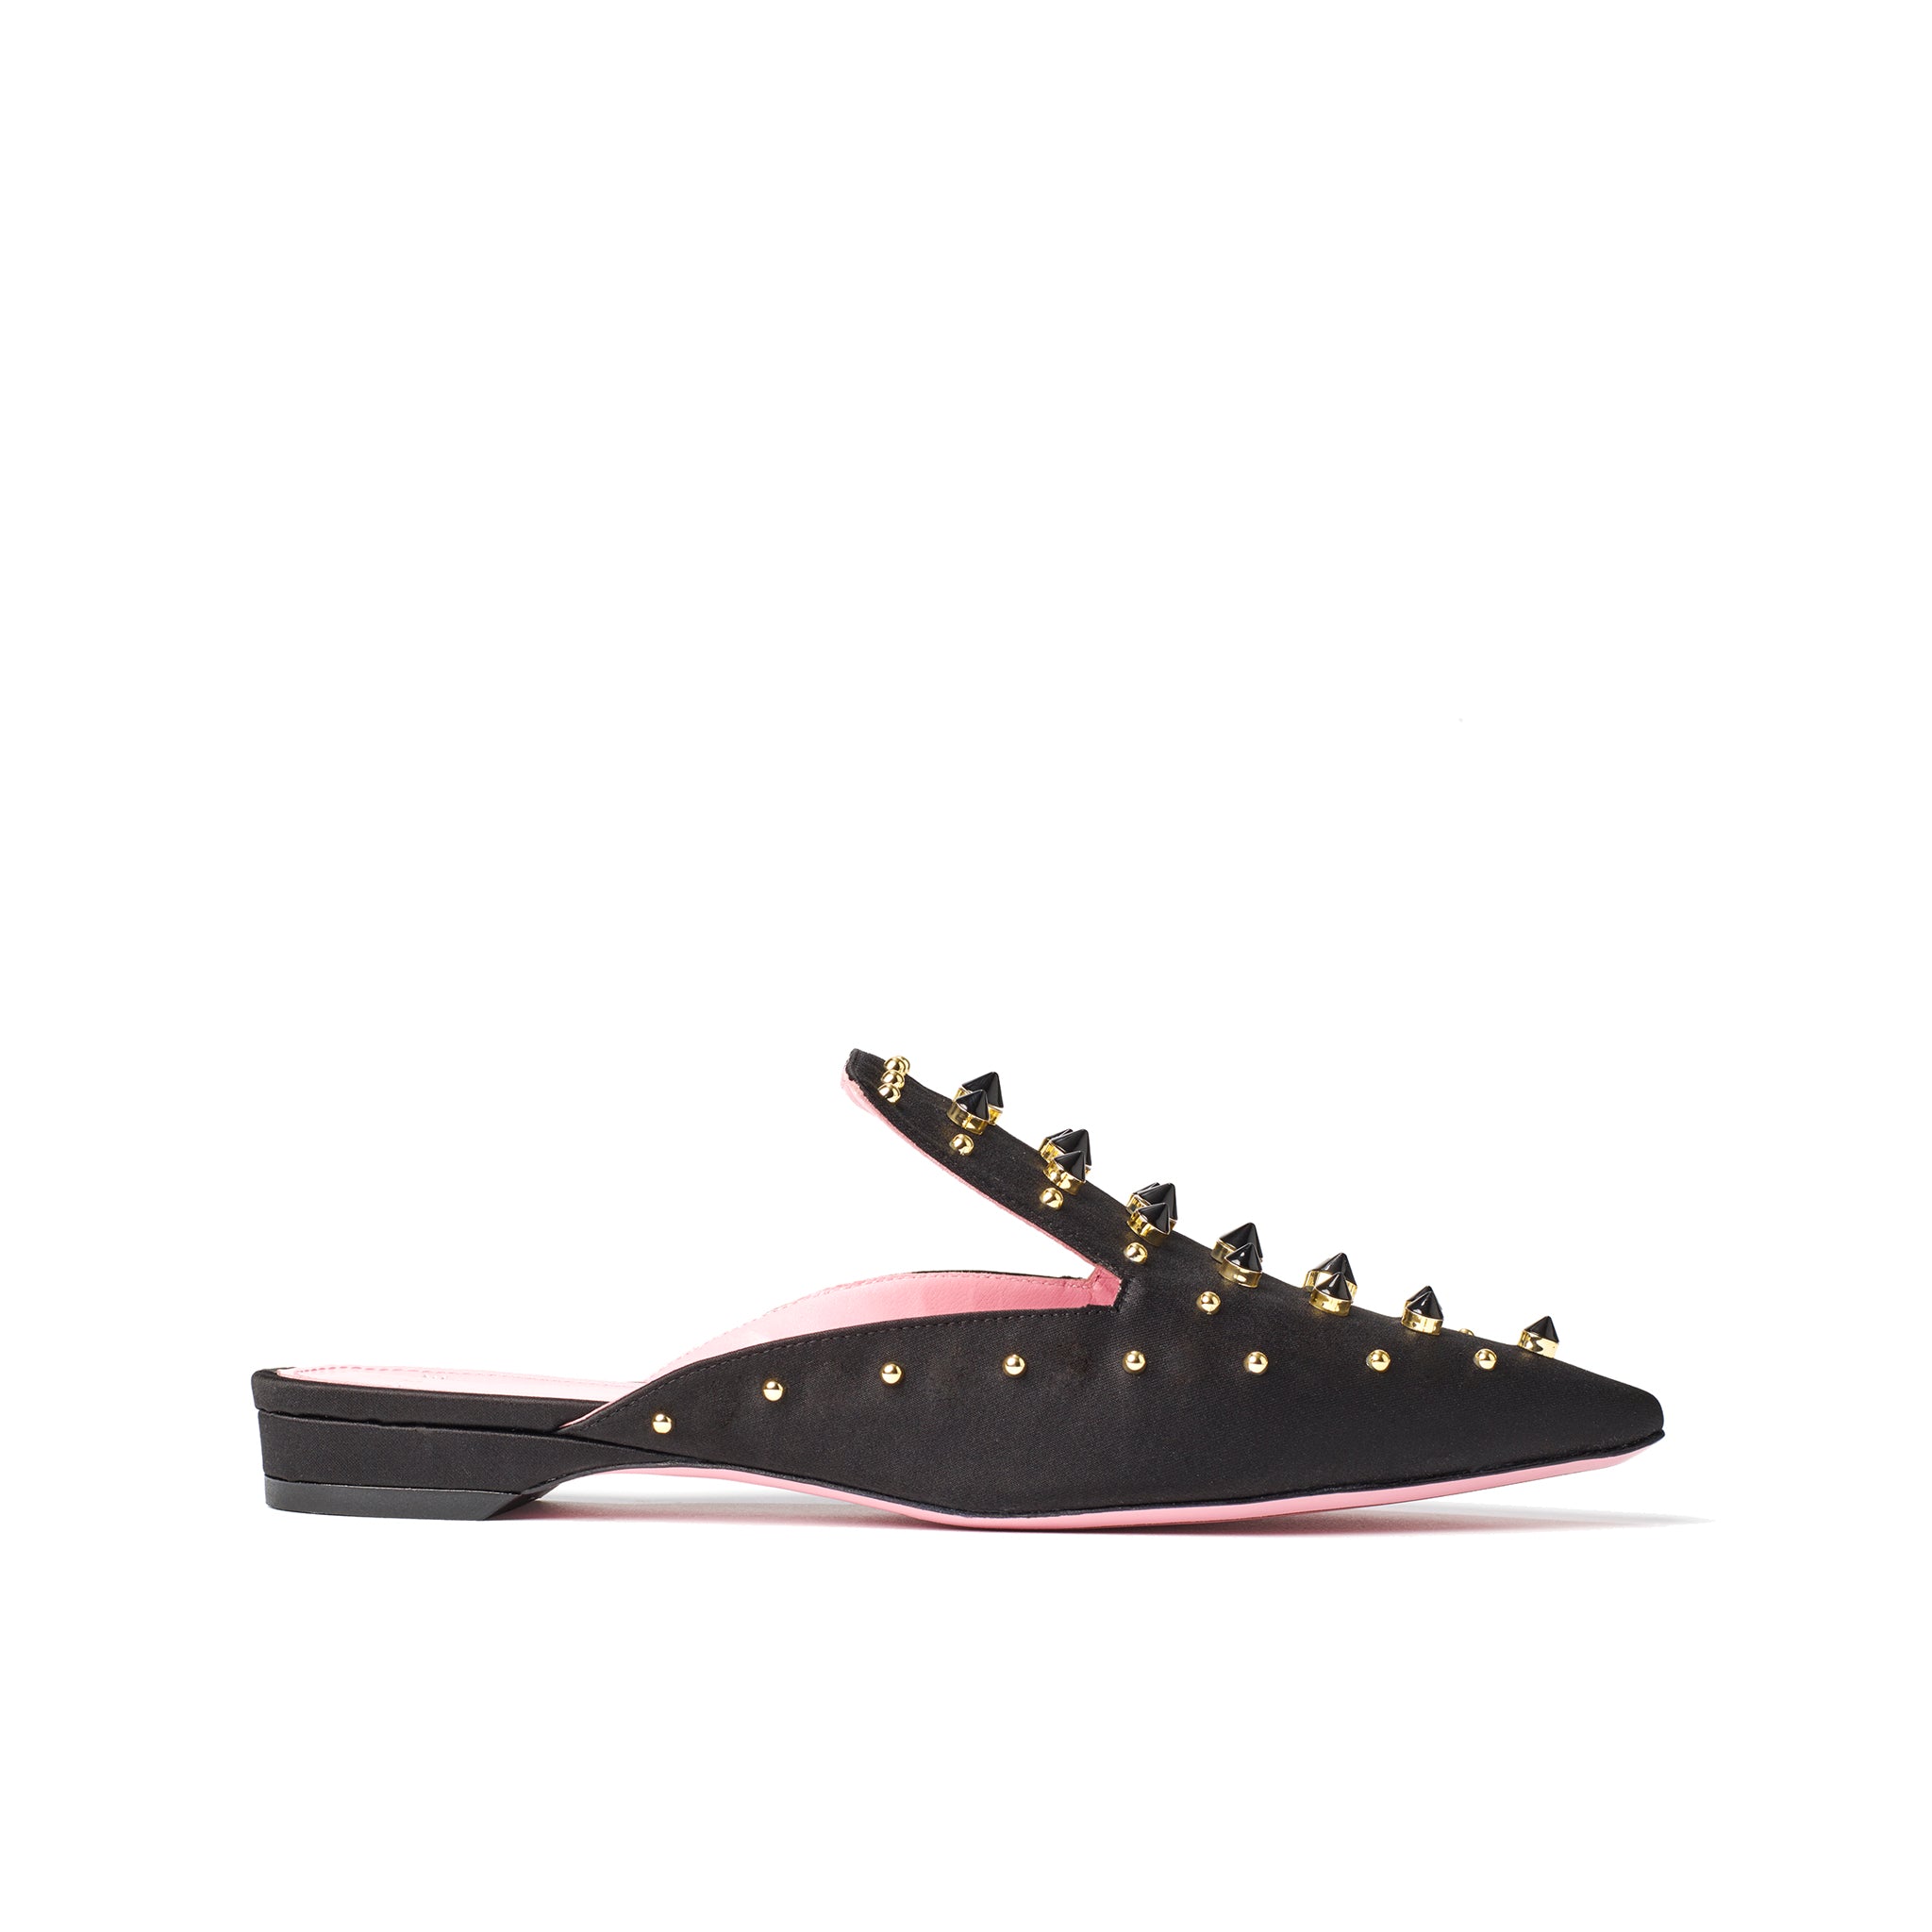 Phare Studded mule in black silk satin with gold and black studs